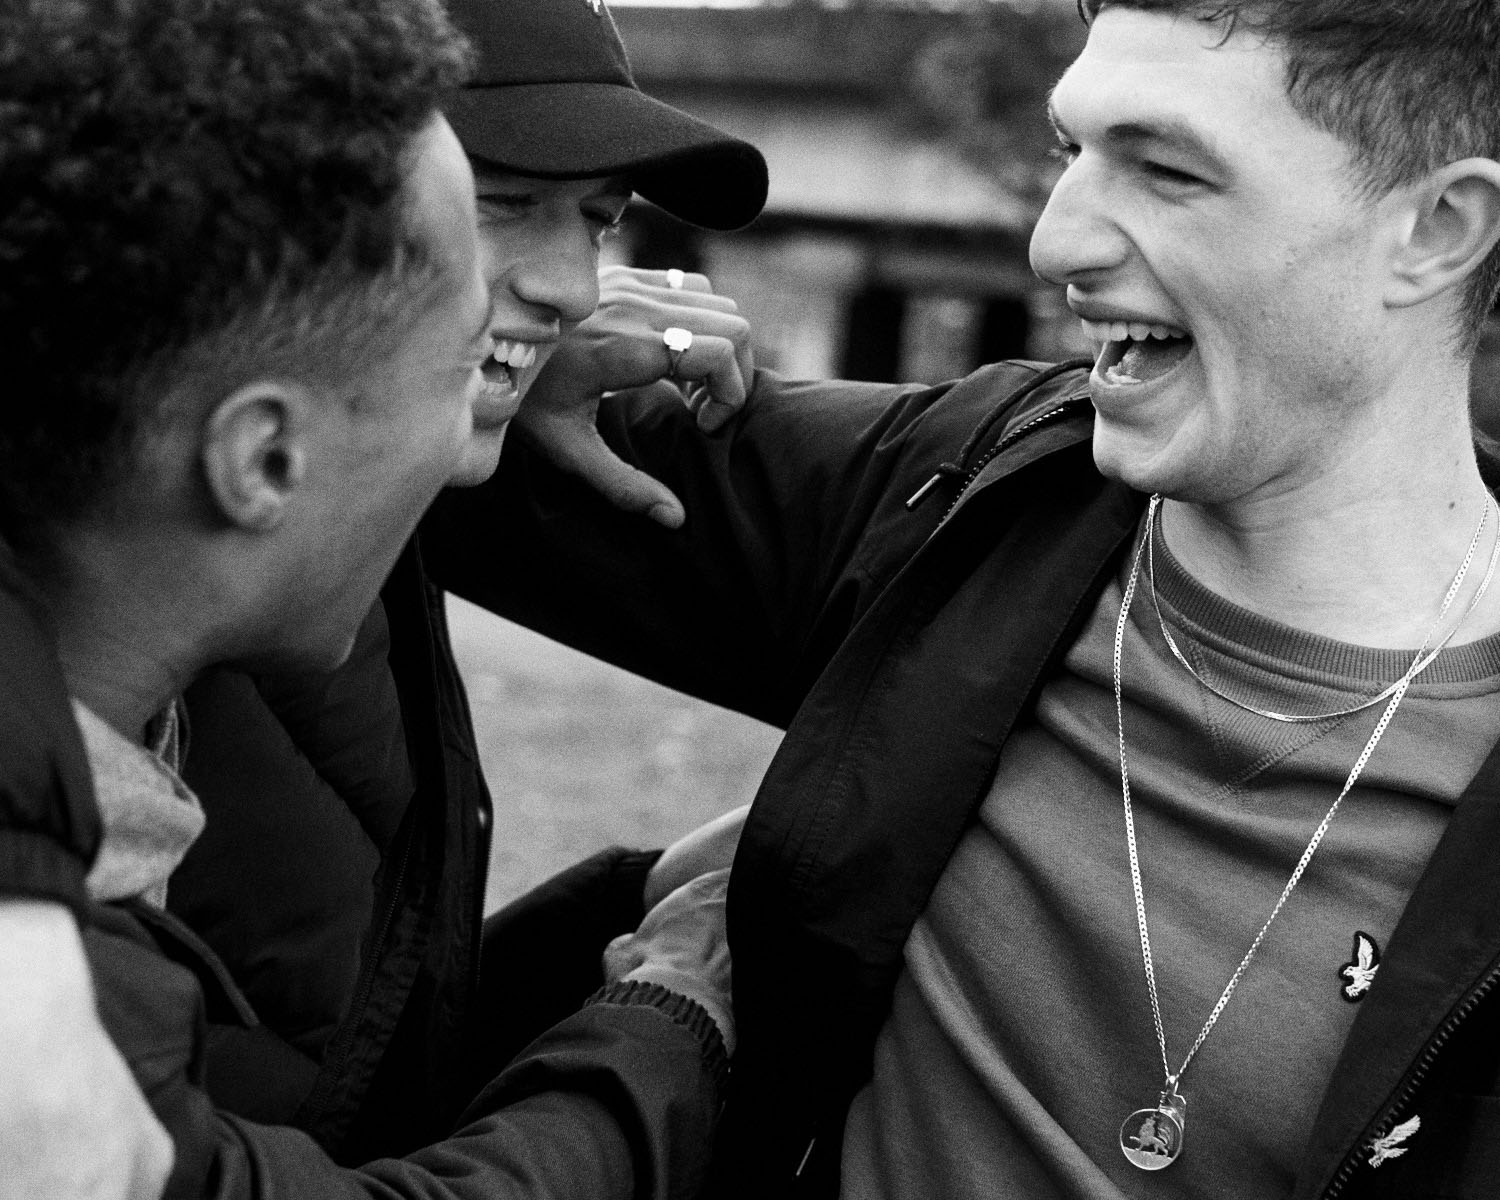 B/W,3 Lads  hug and laugh by lifestyle photographer Tim Cole